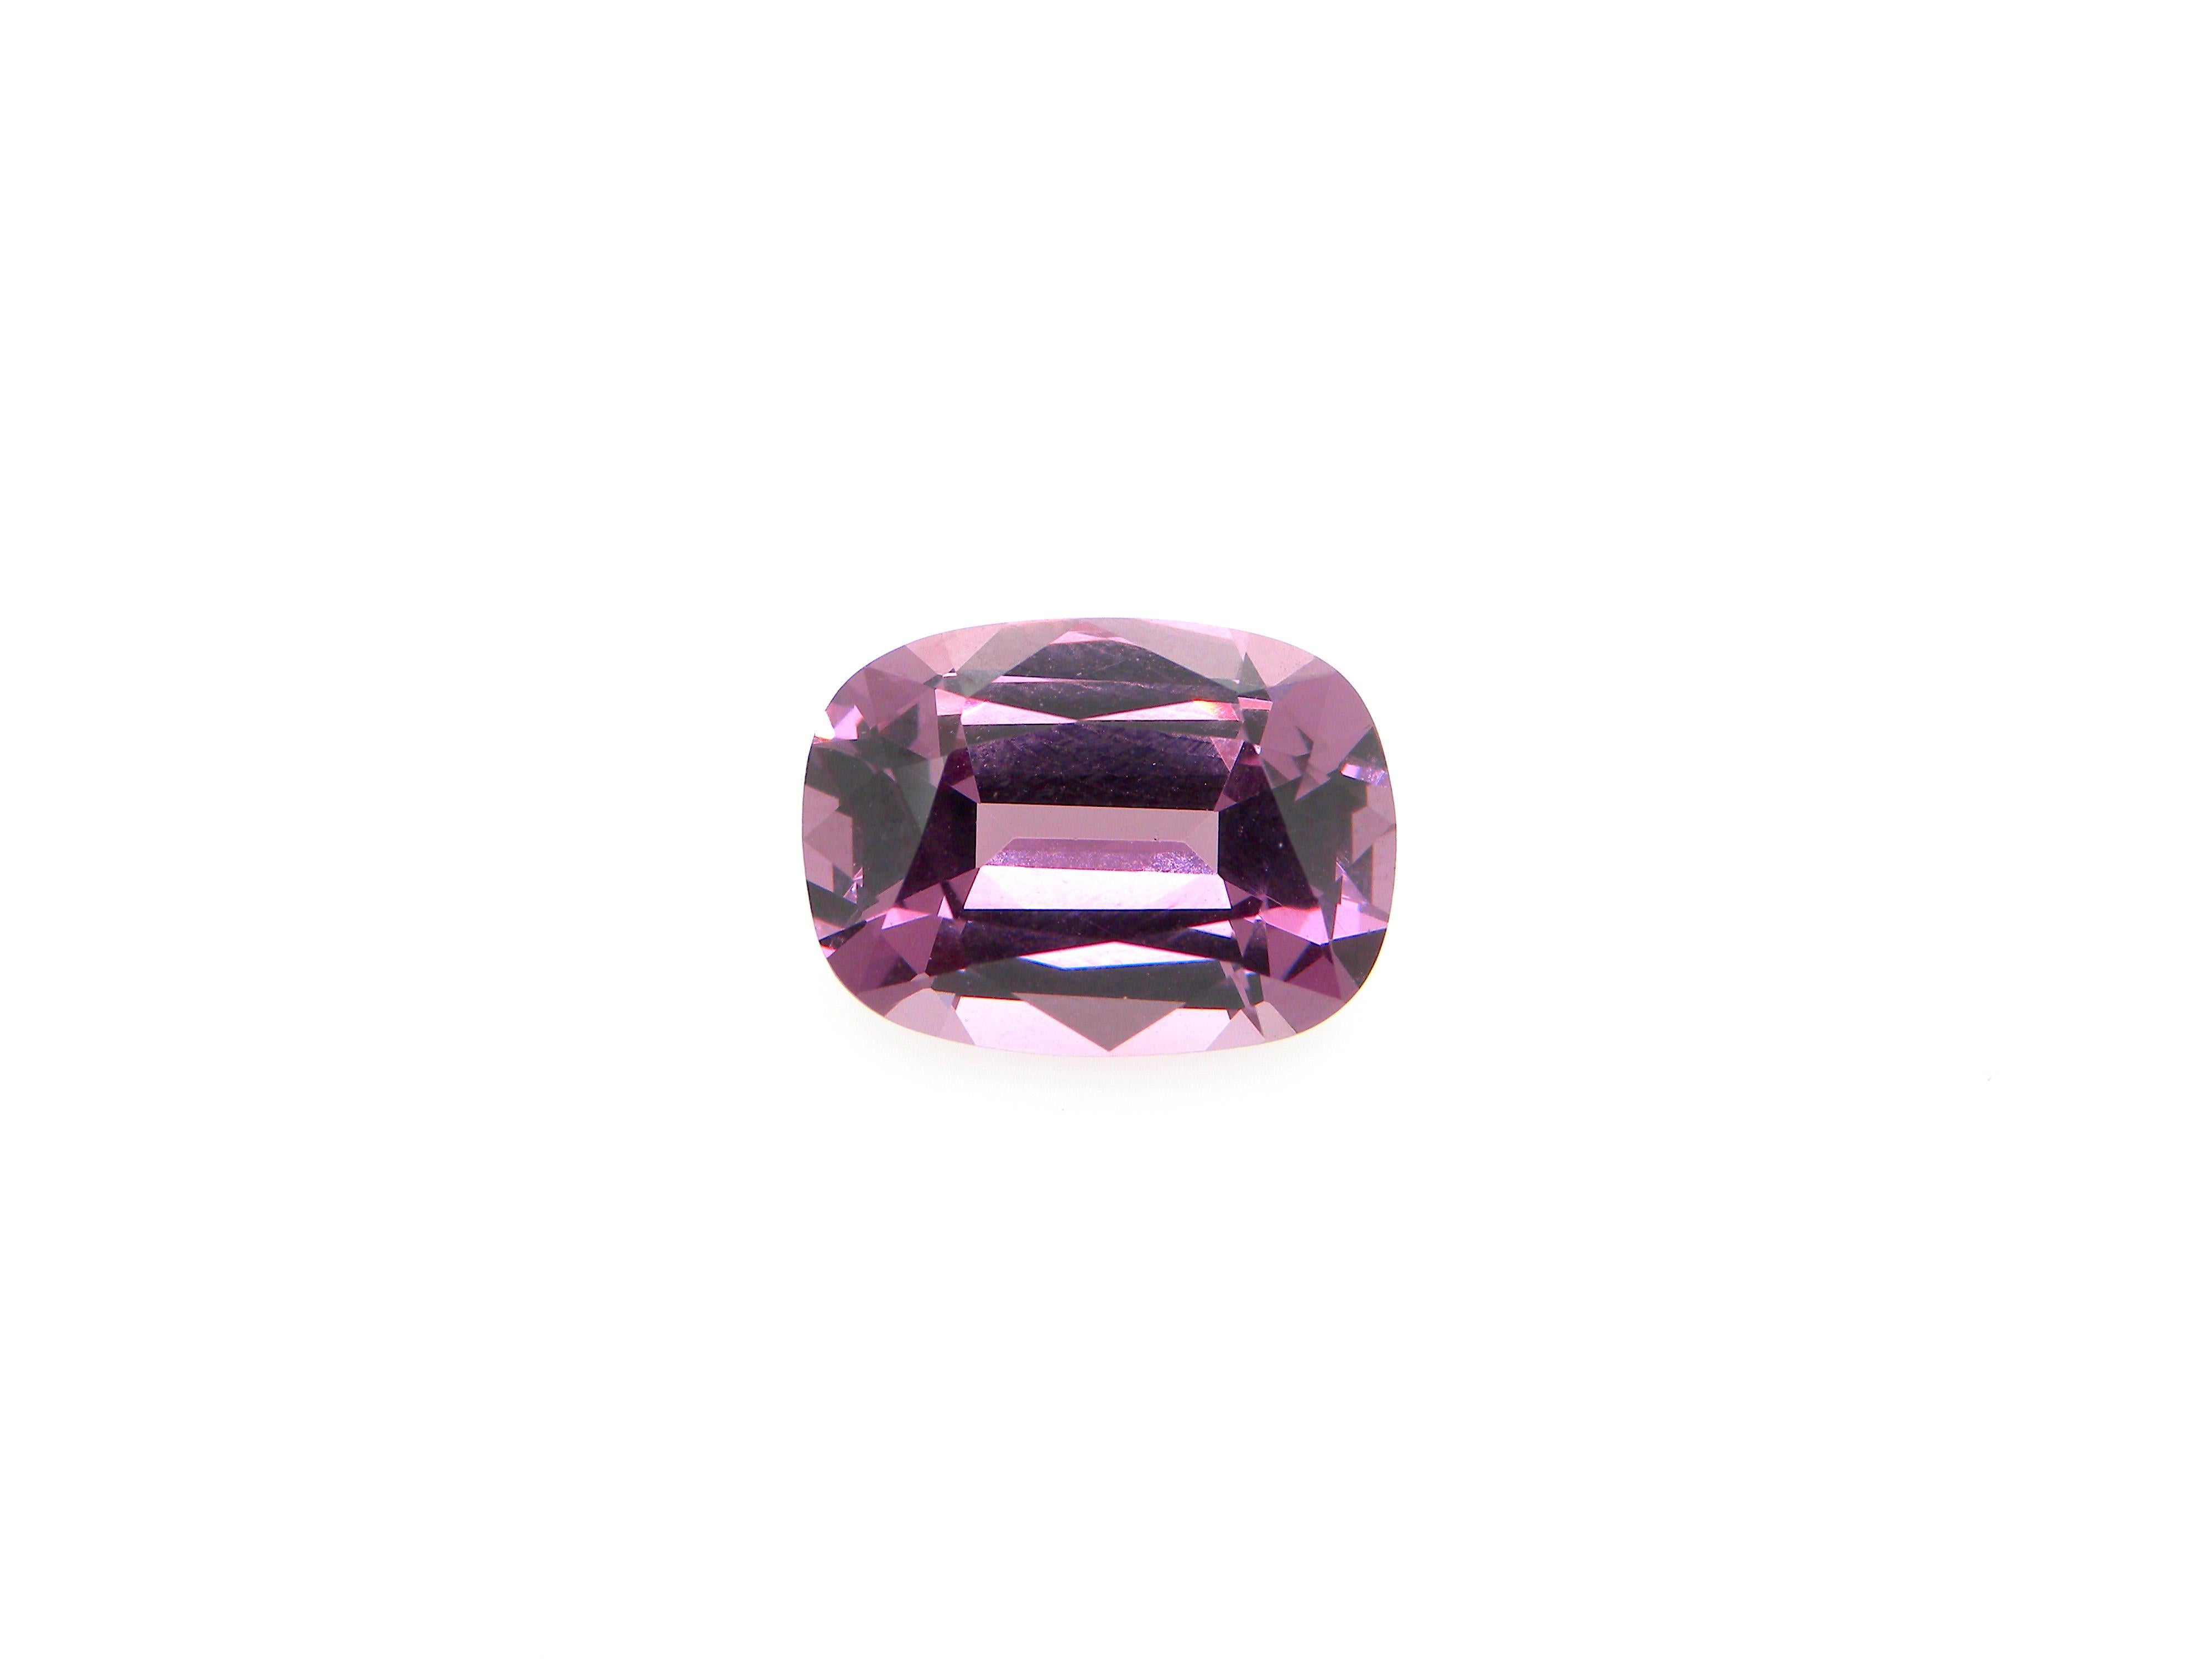 7.06 Carat GRS Certified Unheated Cushion-Cut Burmese Purple Pink Spinel:

An exquisite gem, it is a GRS certified 7.06 carat unheated cushion-cut Burmese purple-pink spinel. Hailing from the important Bawmar mine in Burma, the spinel possesses a